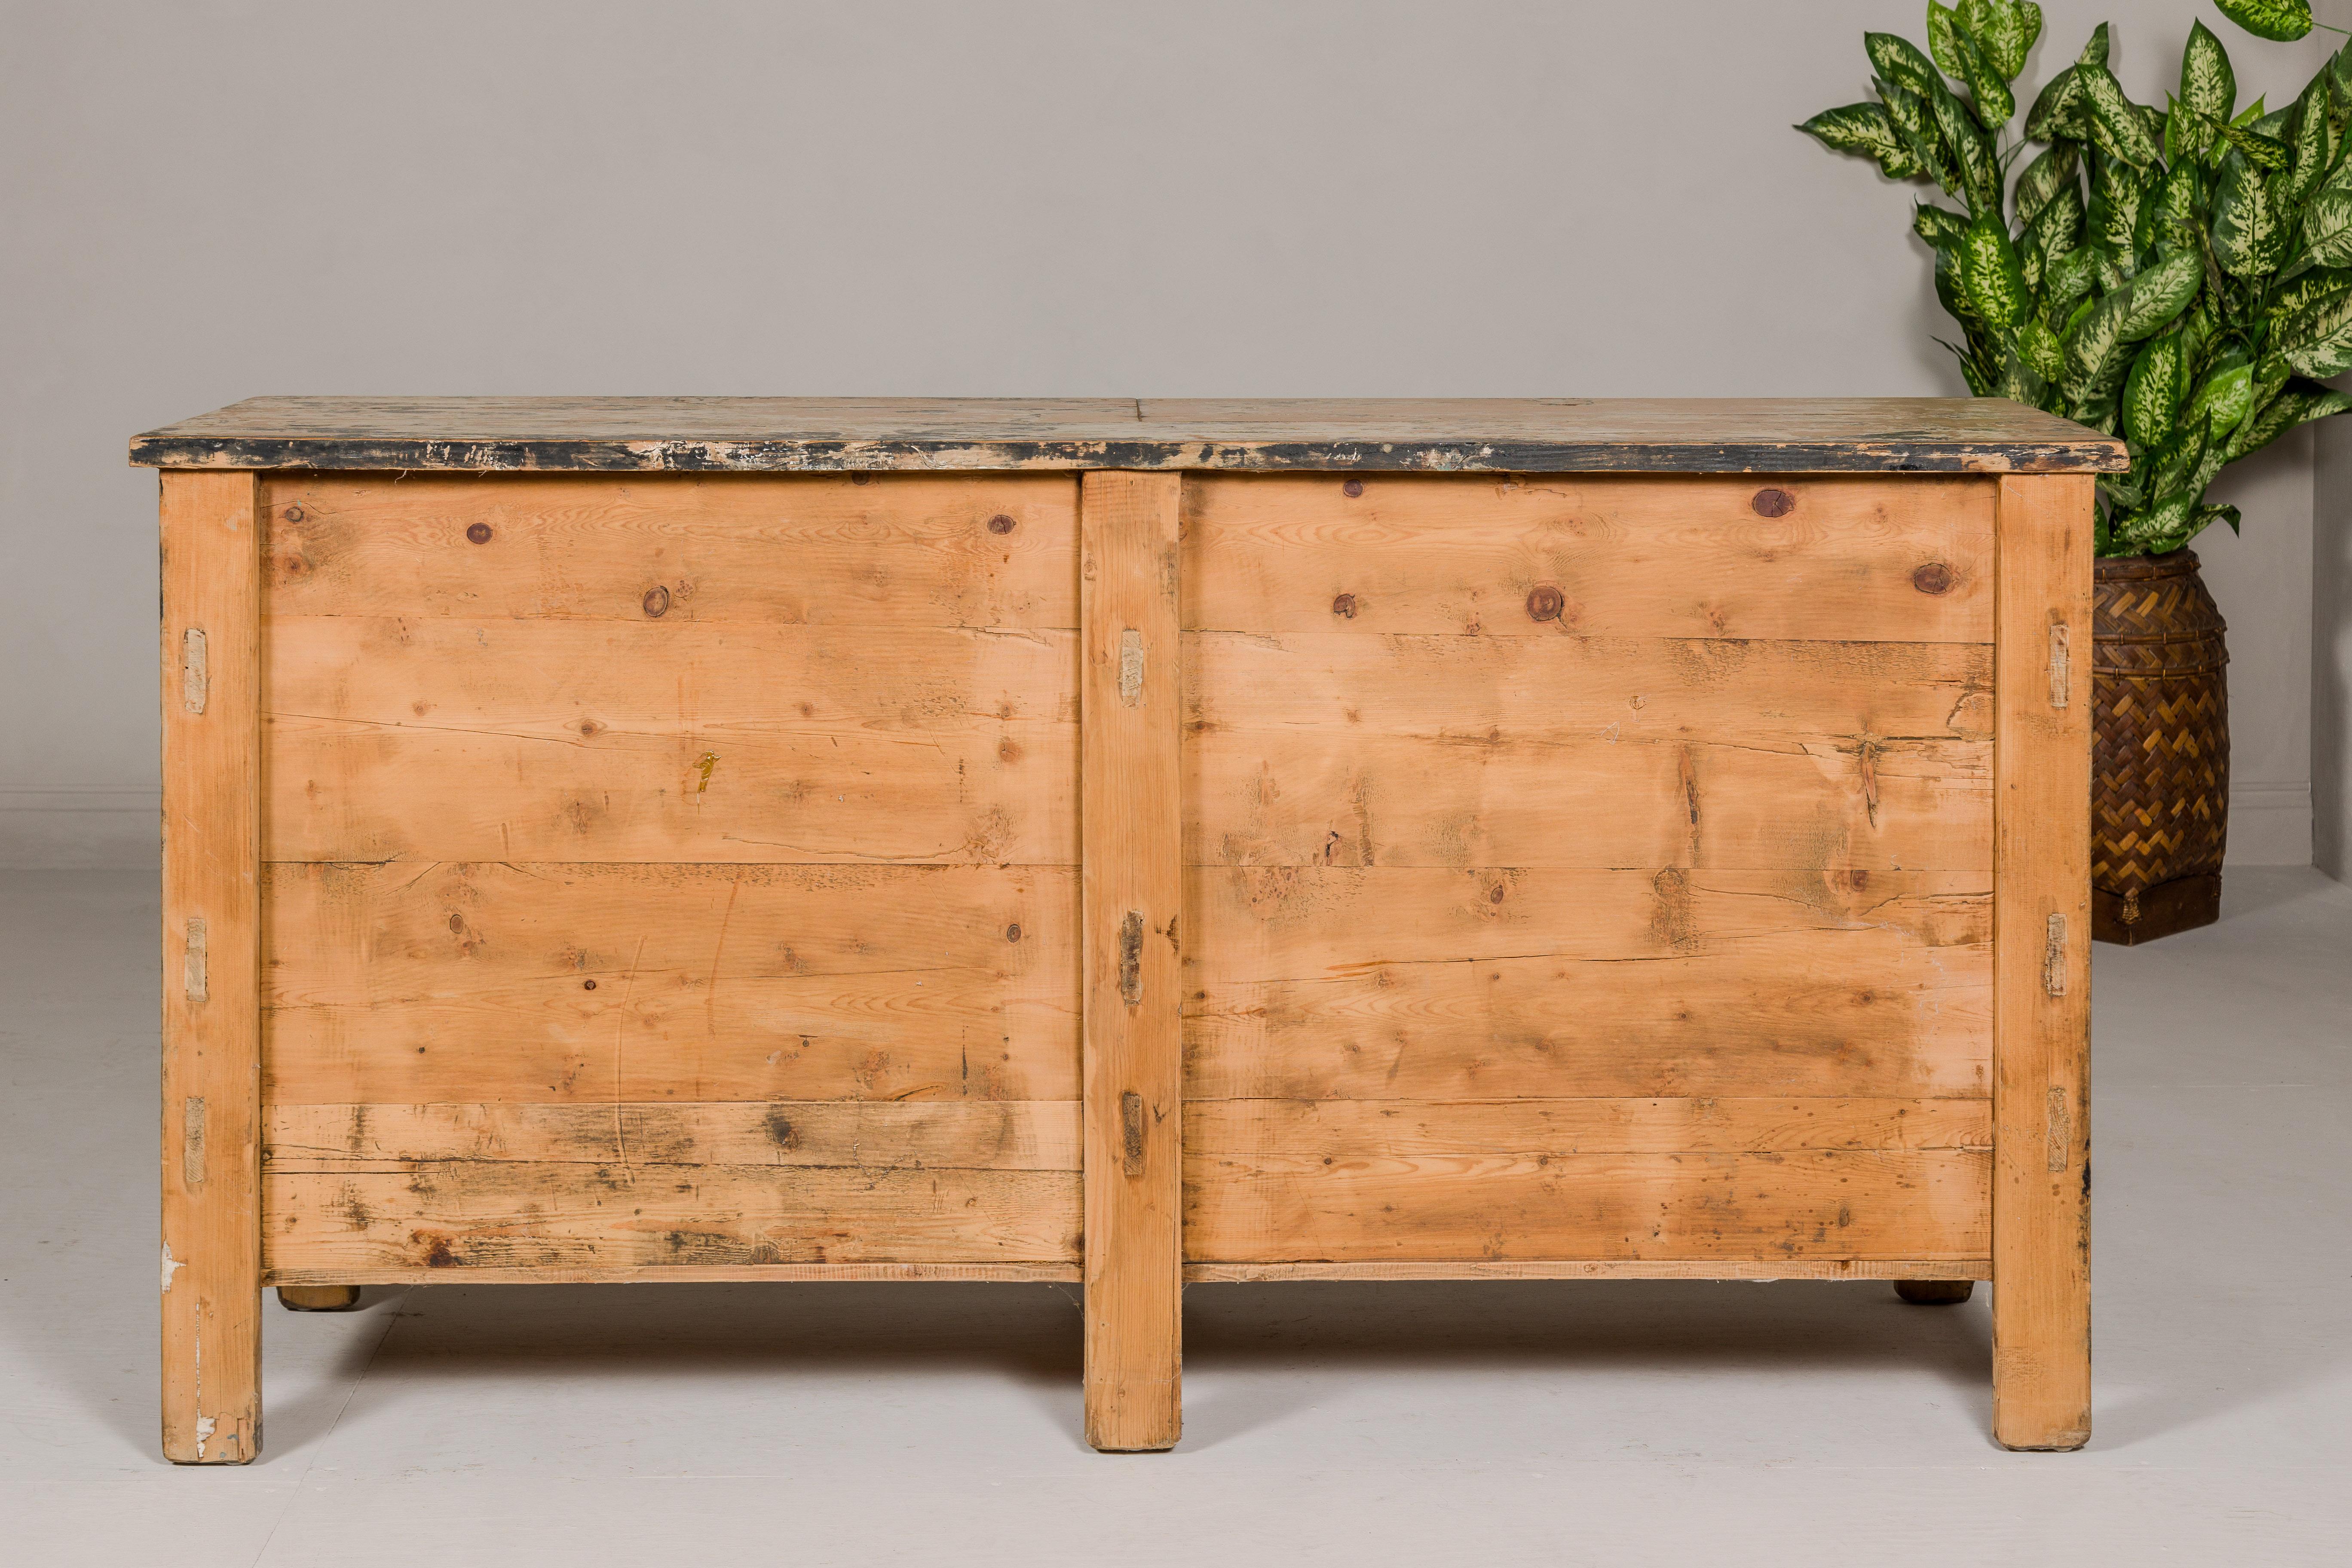 Painted Elm Rustic Sideboard with Two Doors, Four Drawers and Distressed Finish For Sale 13